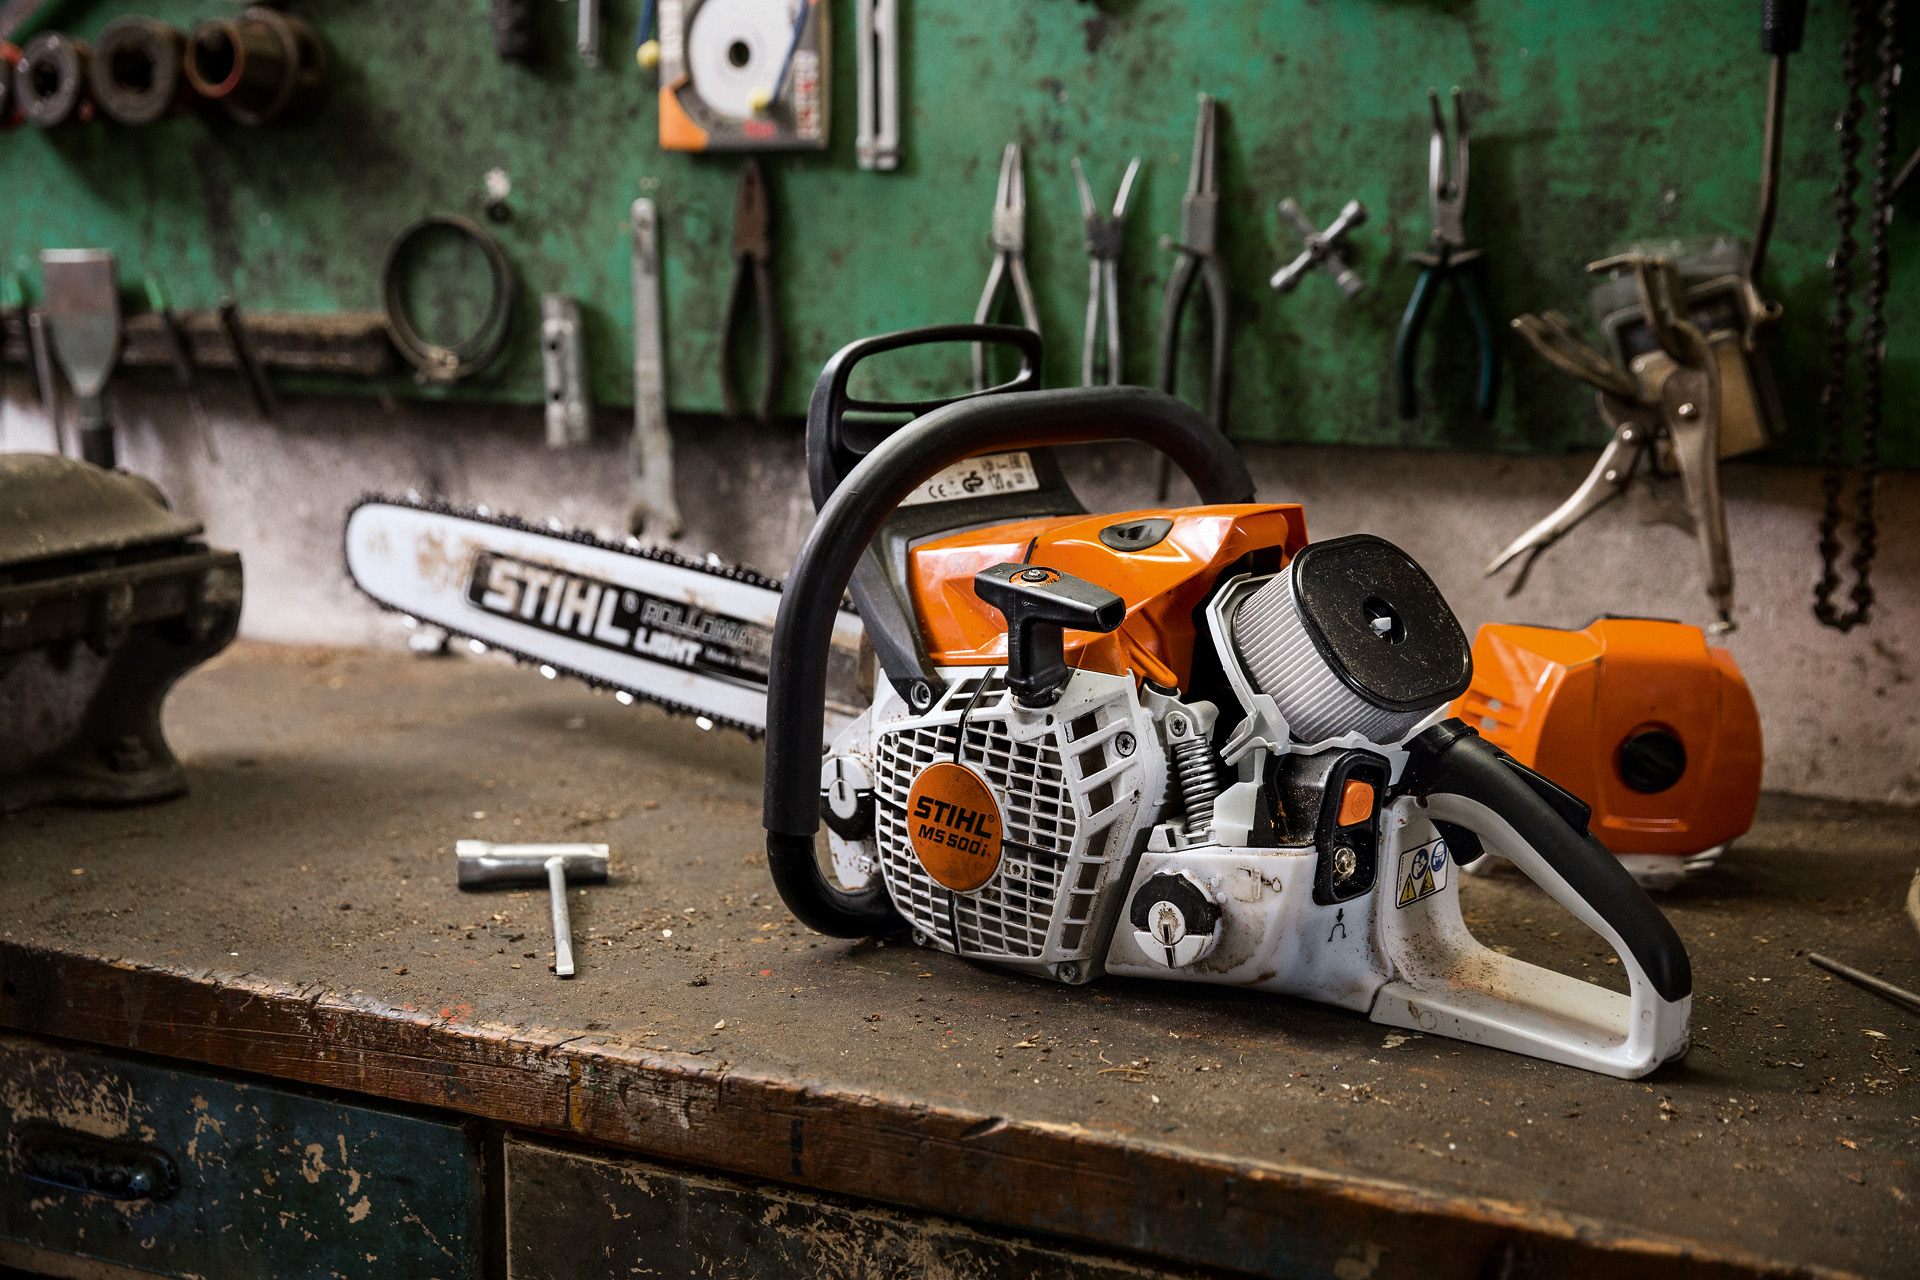 A STIHL MS 500i W petrol chainsaw on a workbench with tools hanging on the wall behind